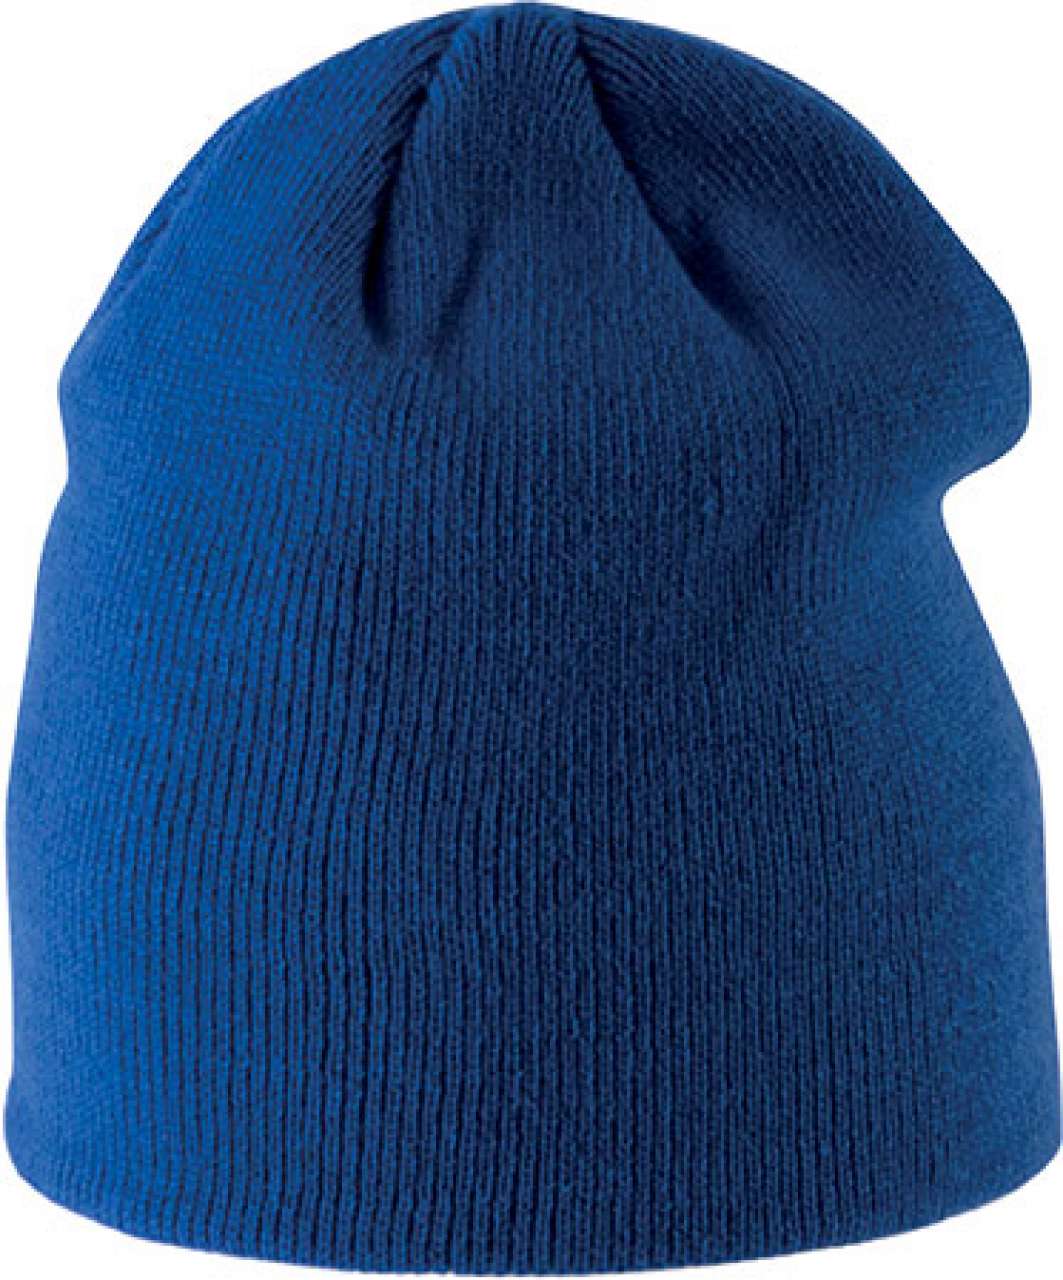 Promo  KNITTED KIDS' BEANIE